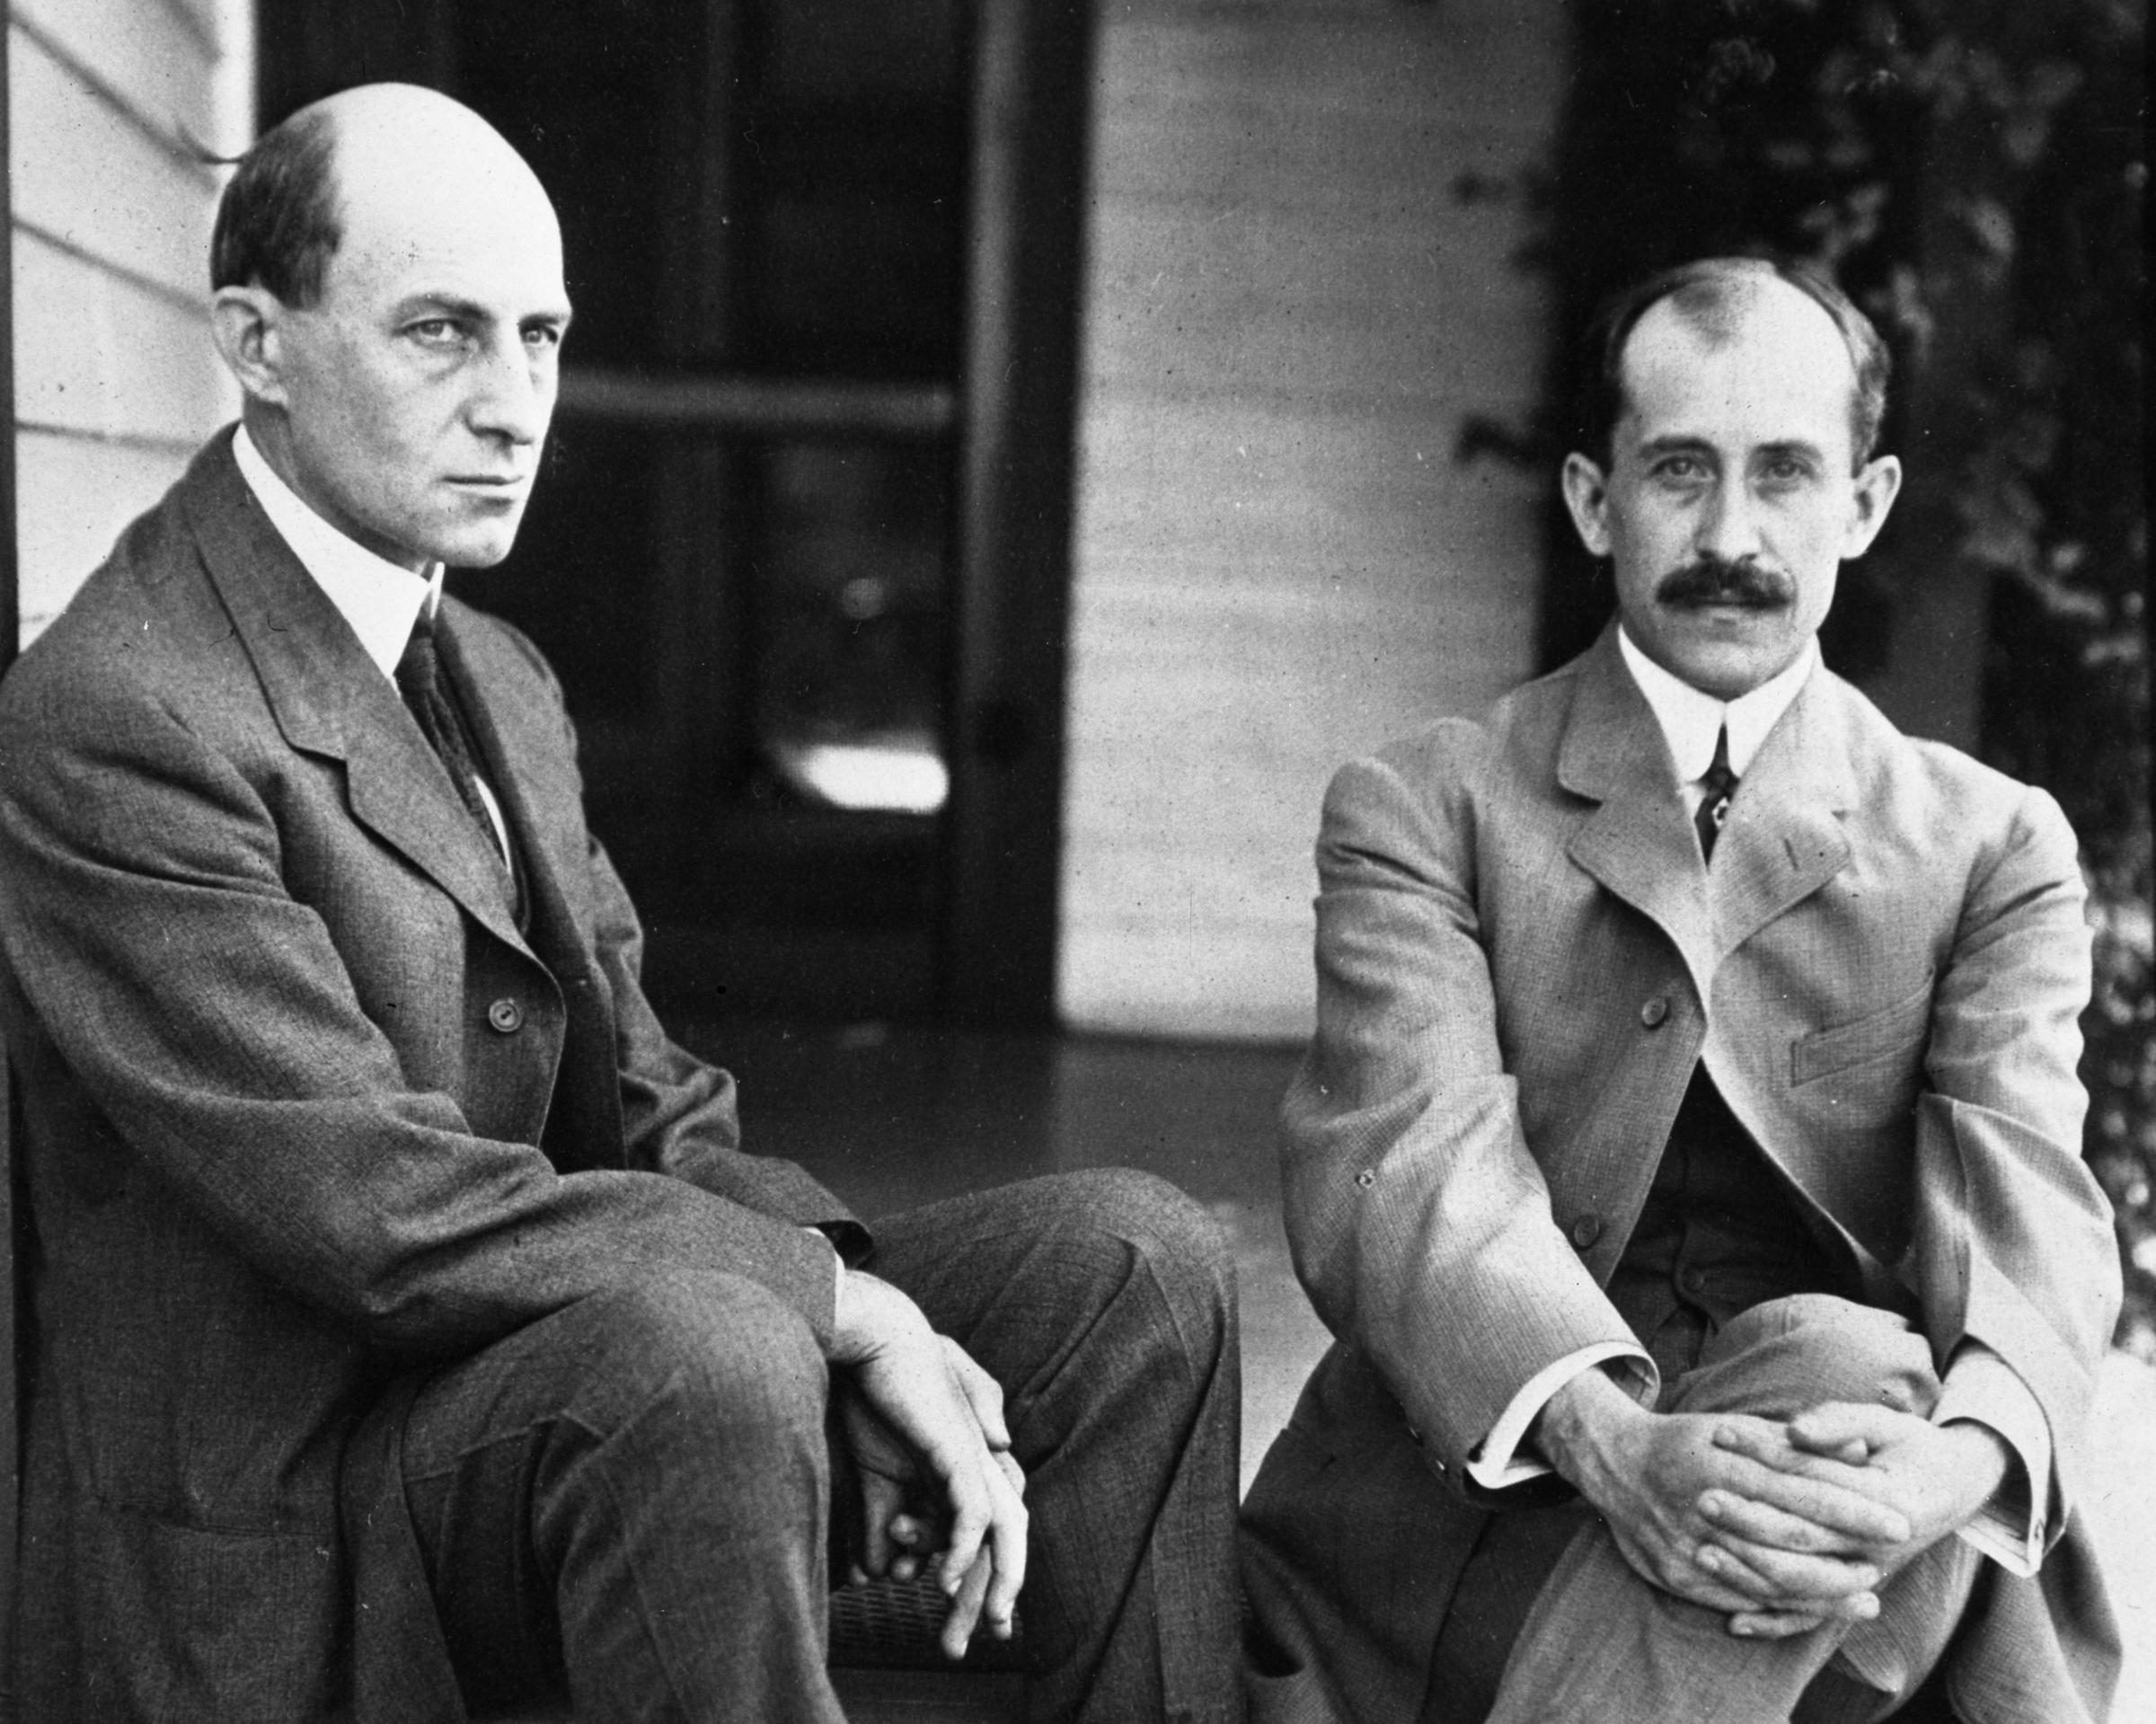 Photo of the Wright brothers. Wilbur, left, and Orville Wright